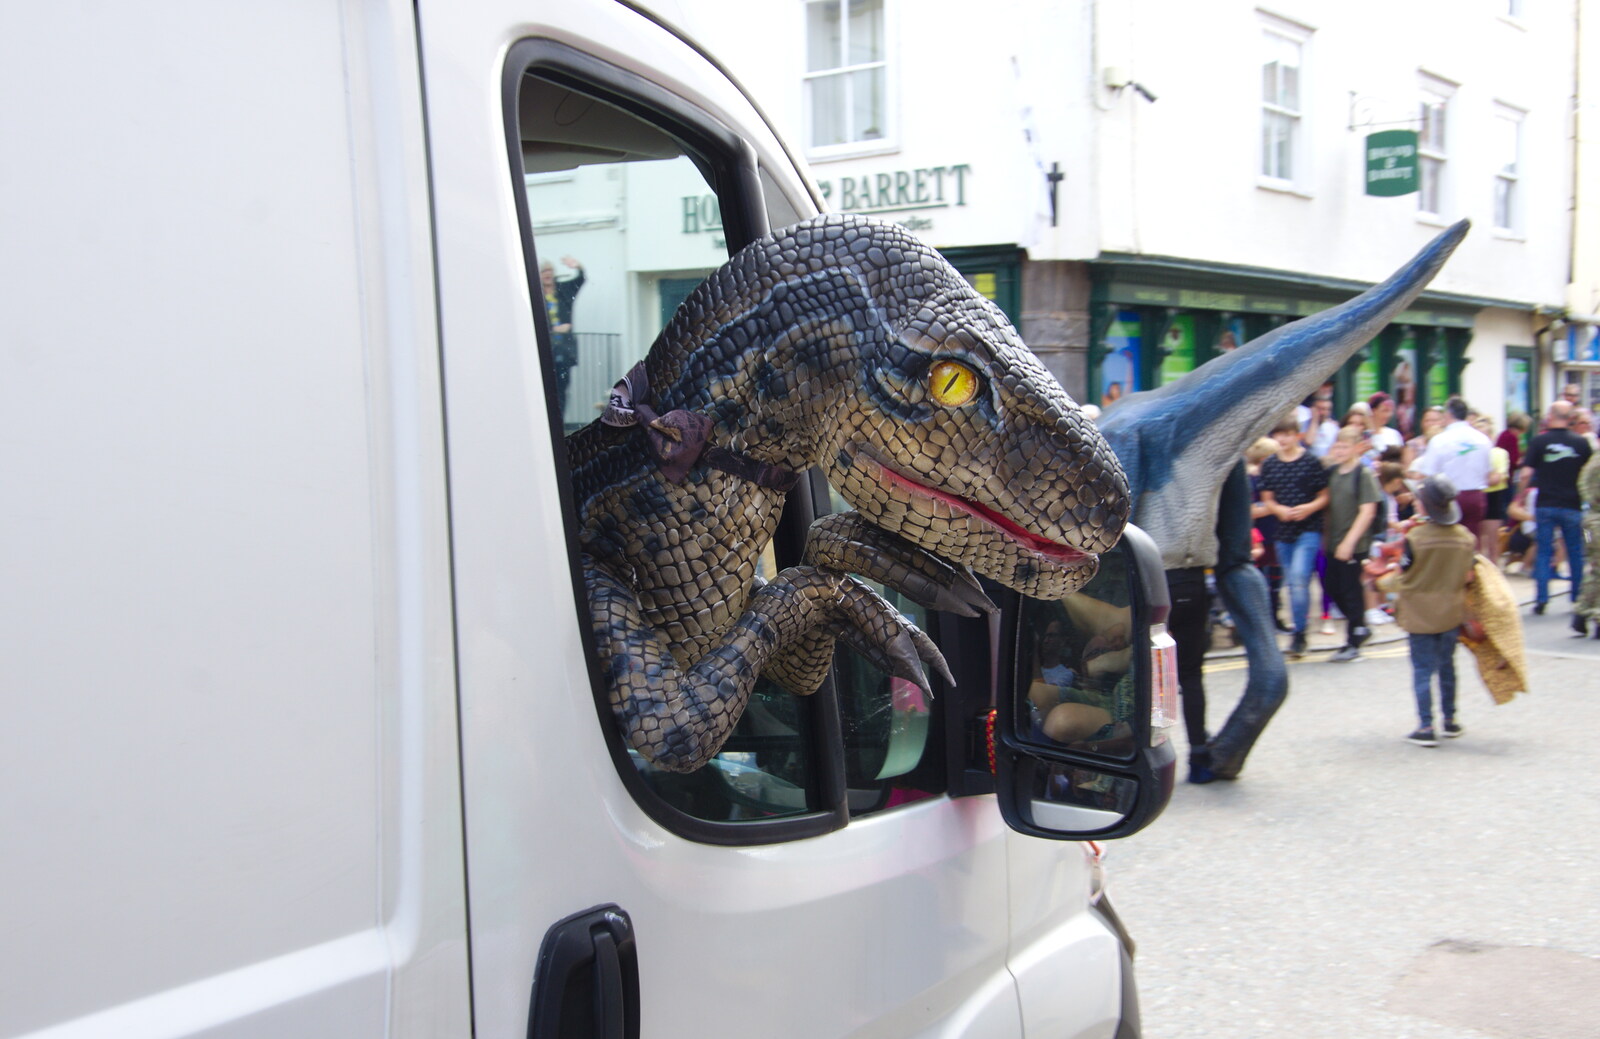 White Van dinosaur from The Diss Carnival 2019, Diss, Norfolk - 9th June 2019